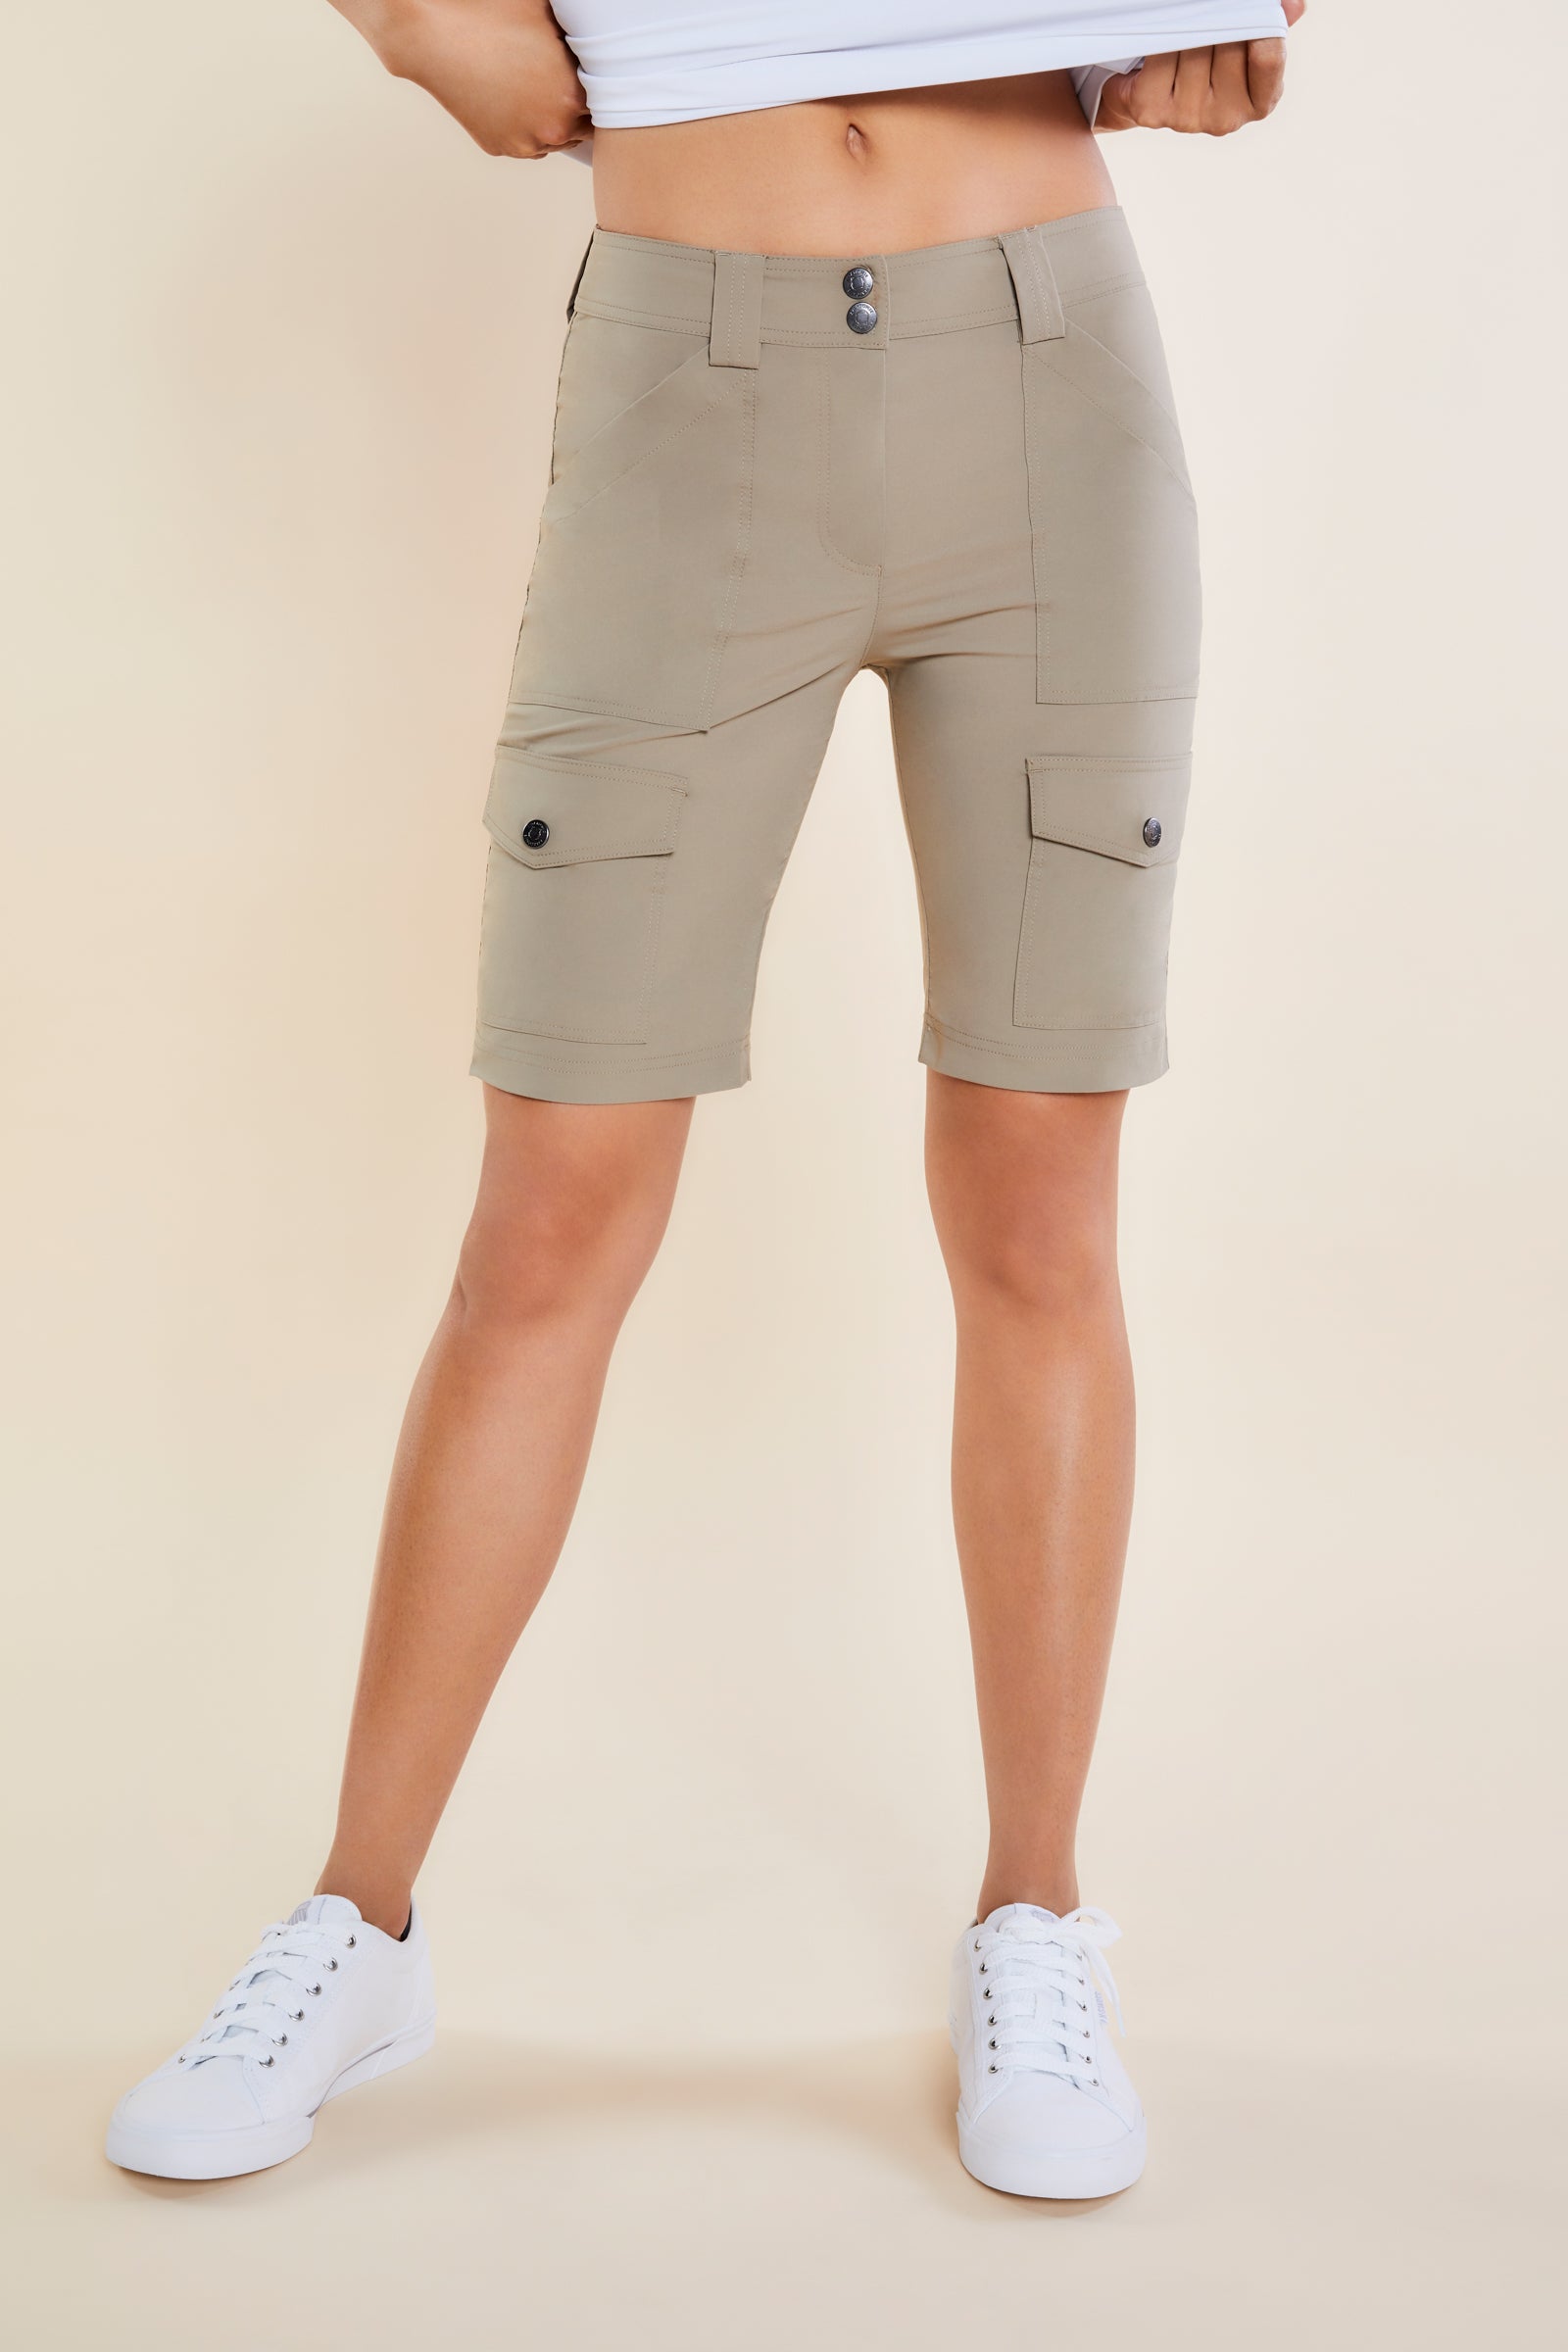 Sonia Grey High Rise Side Zip Pants Size Chart – Anatomie